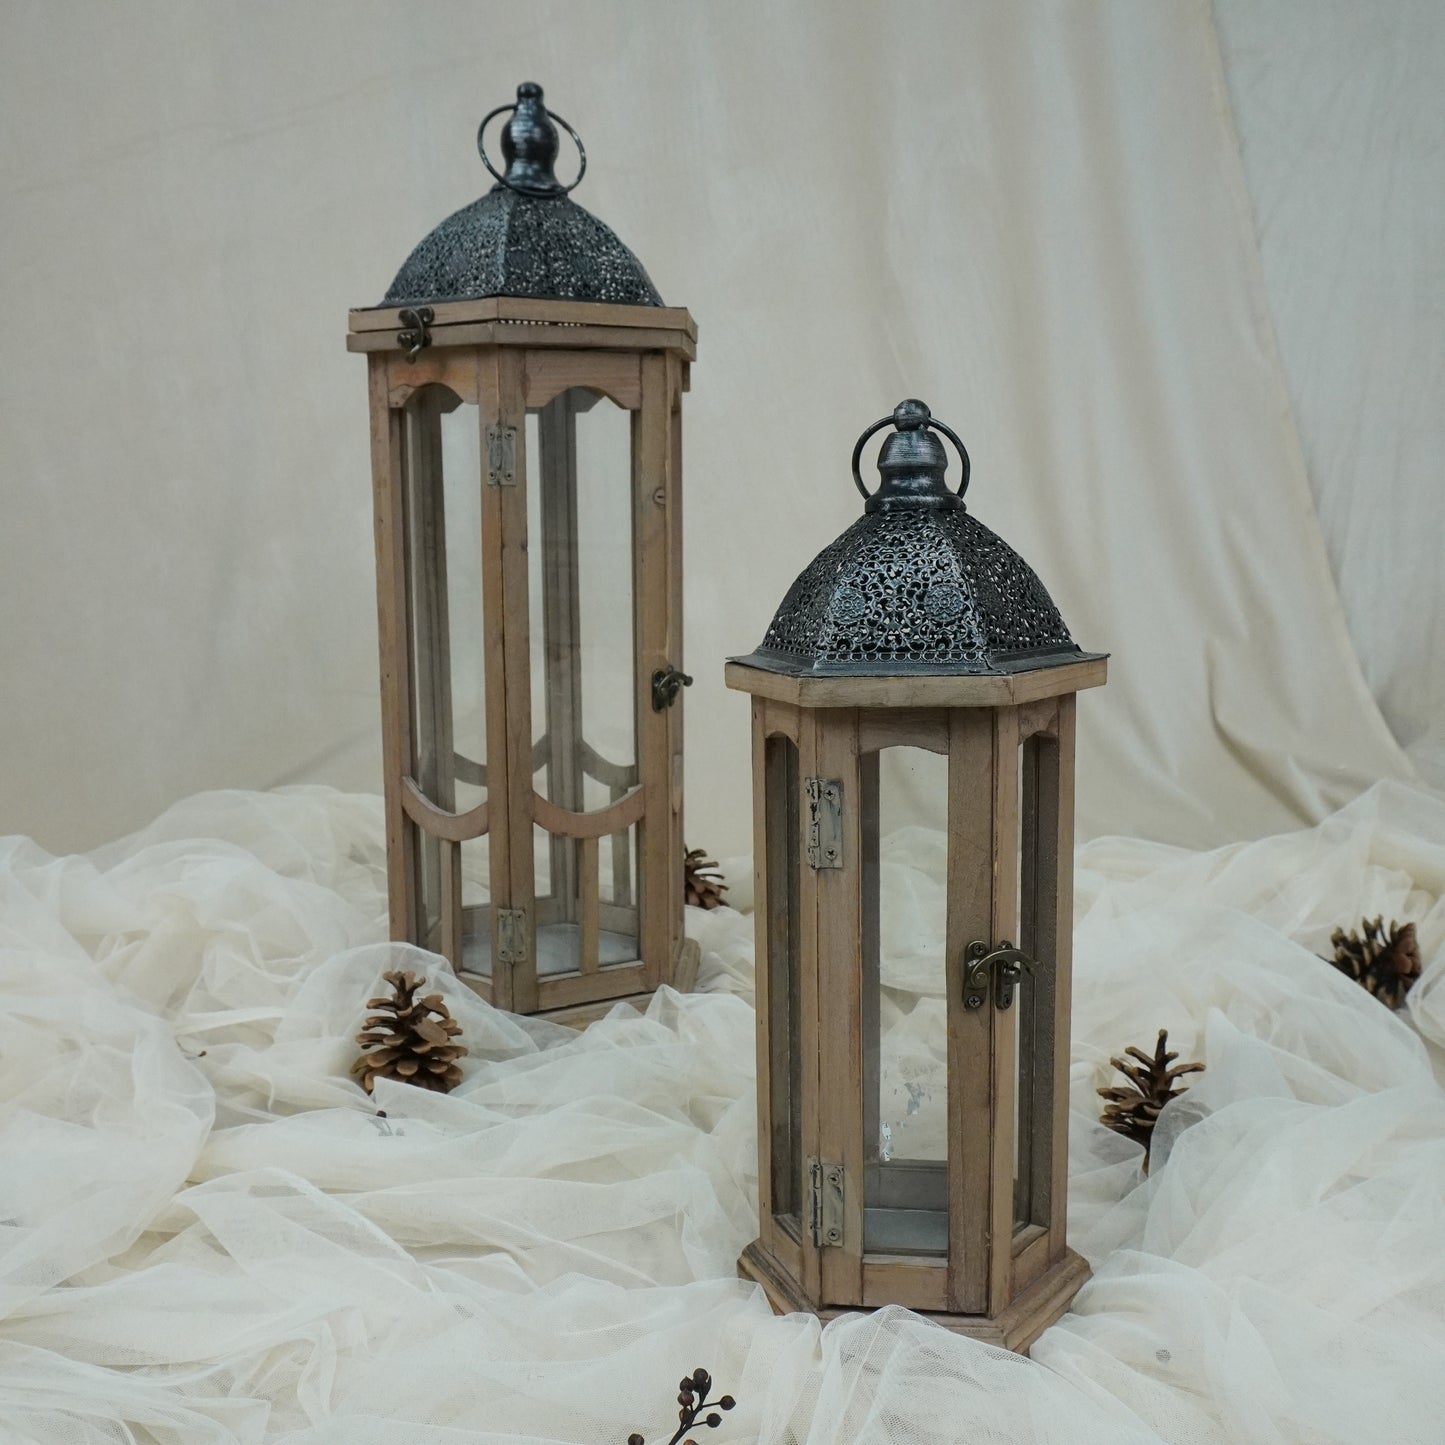 Wooden Lantern with Steel Dome - rental